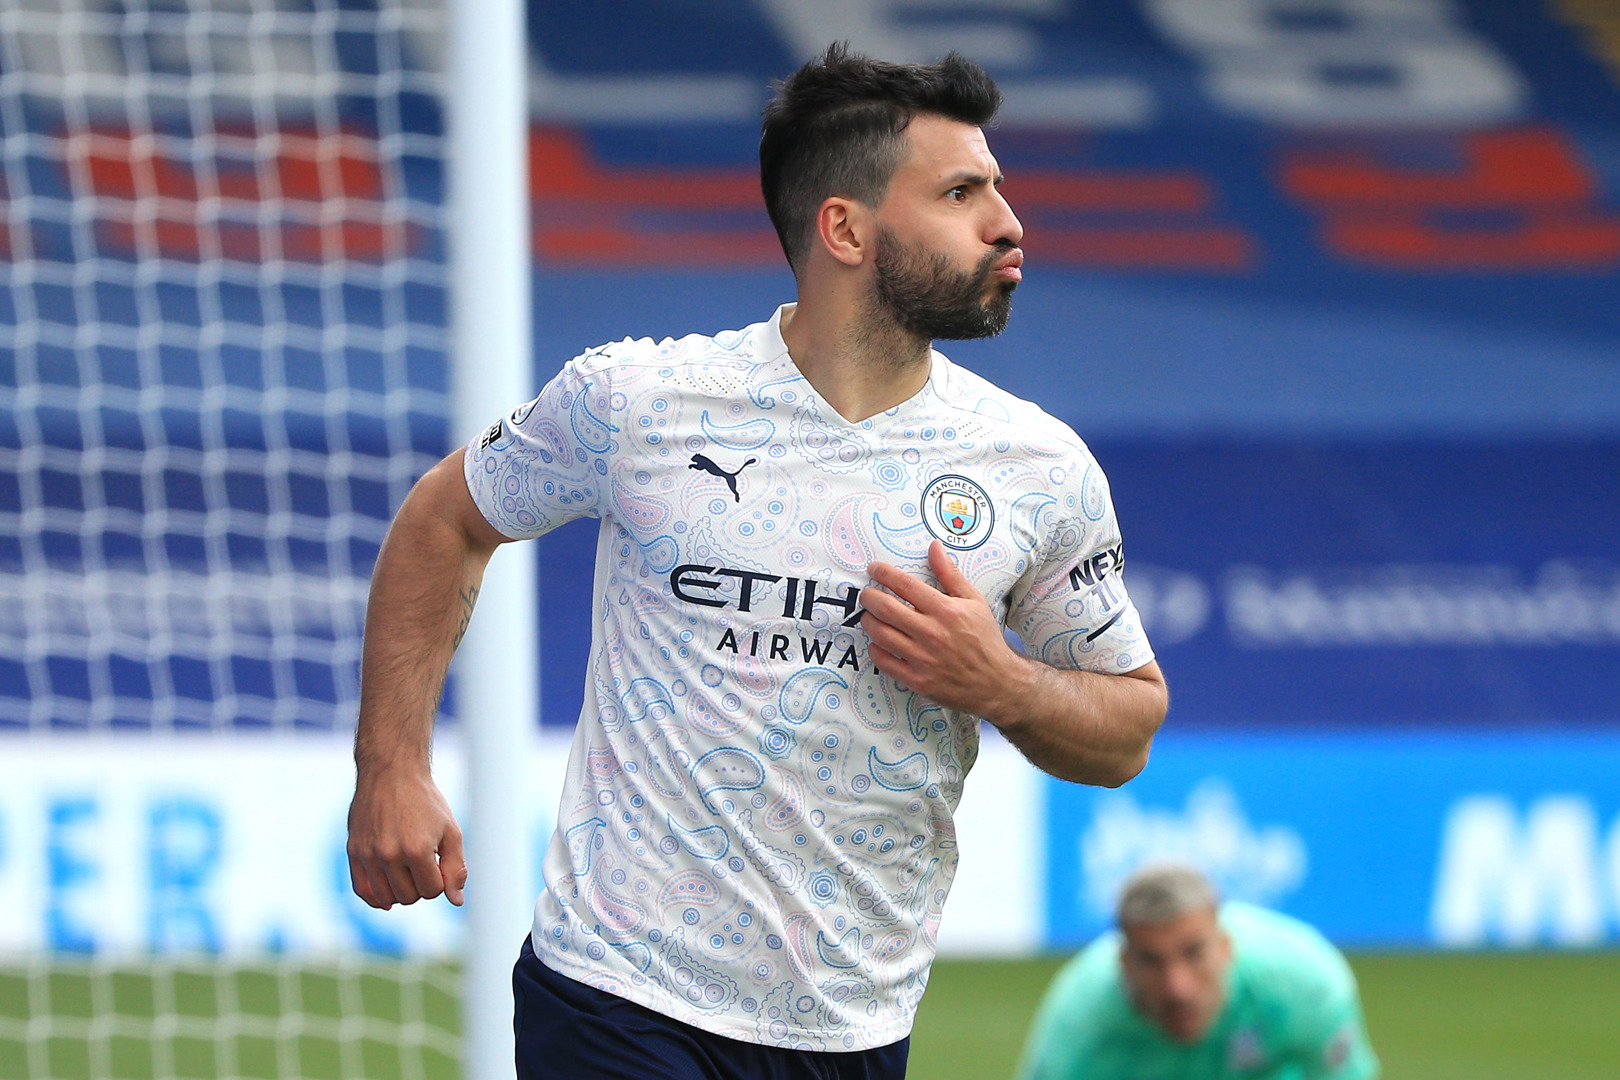 Five changes for Toffees clash - Aguero on bench